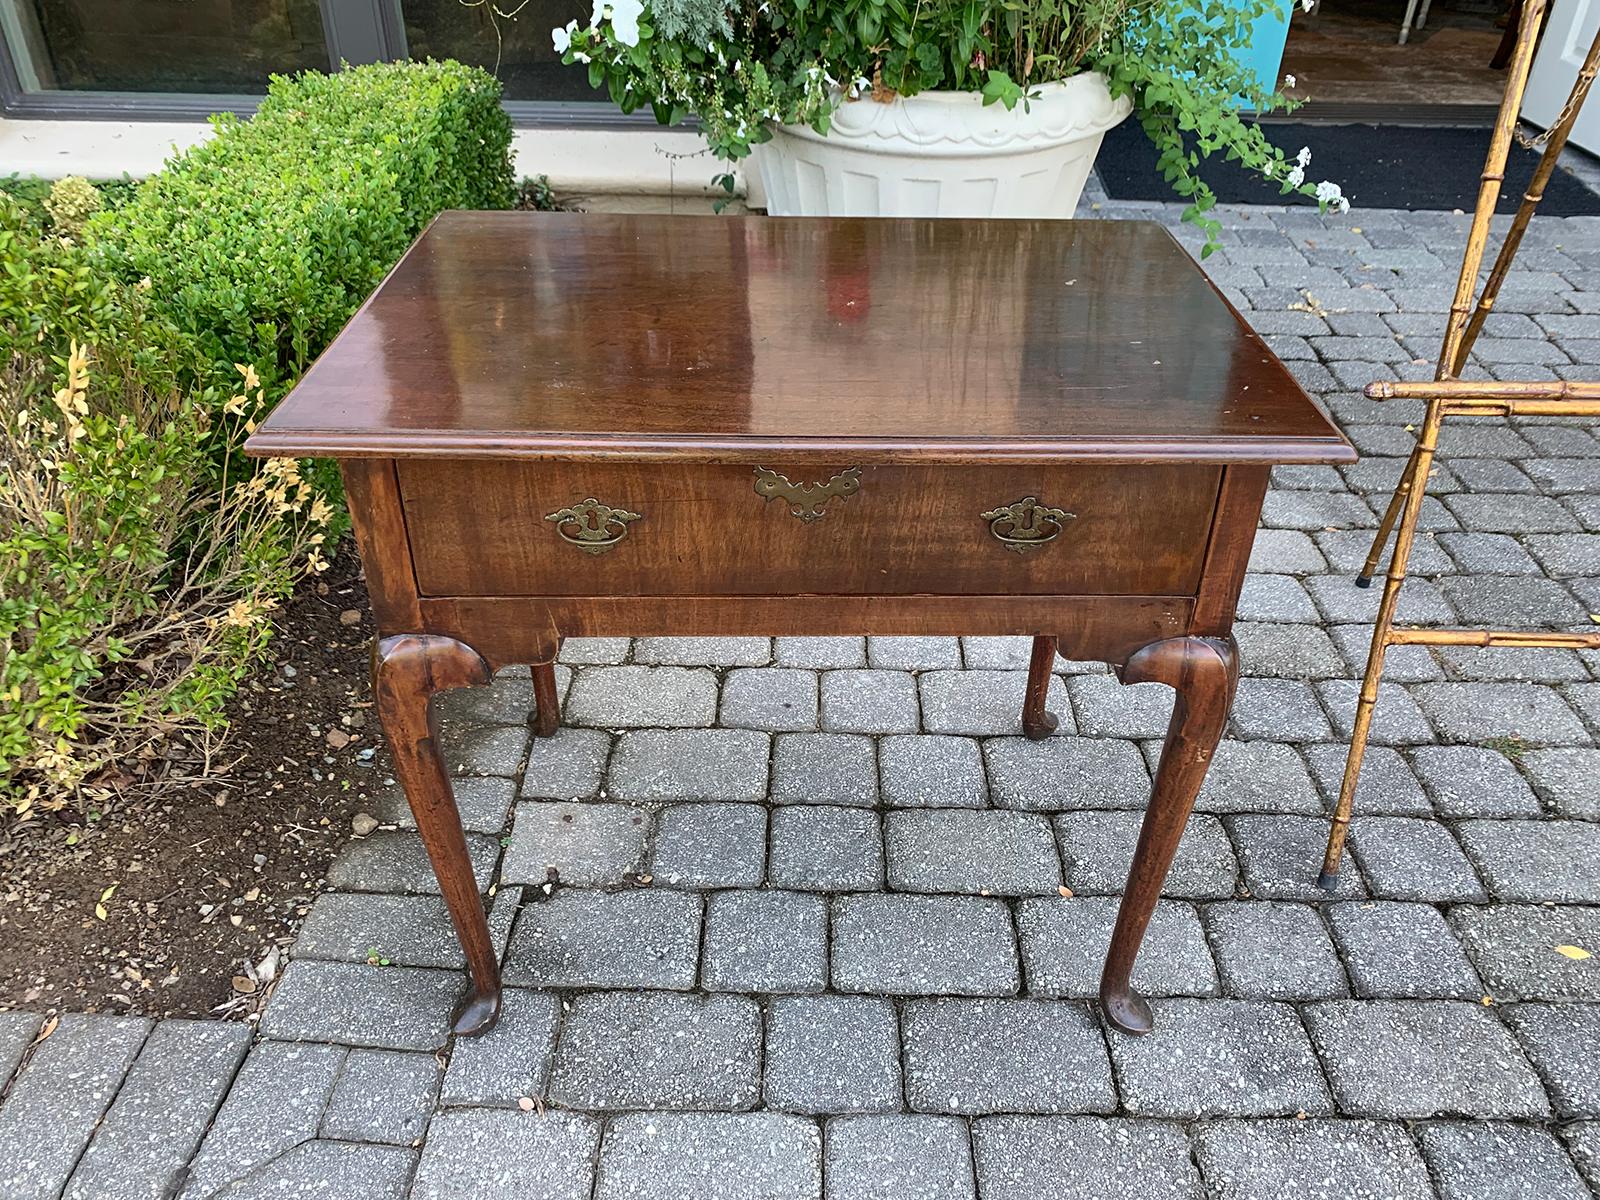 18th-19th Century English Walnut Table with Single Drawer 1